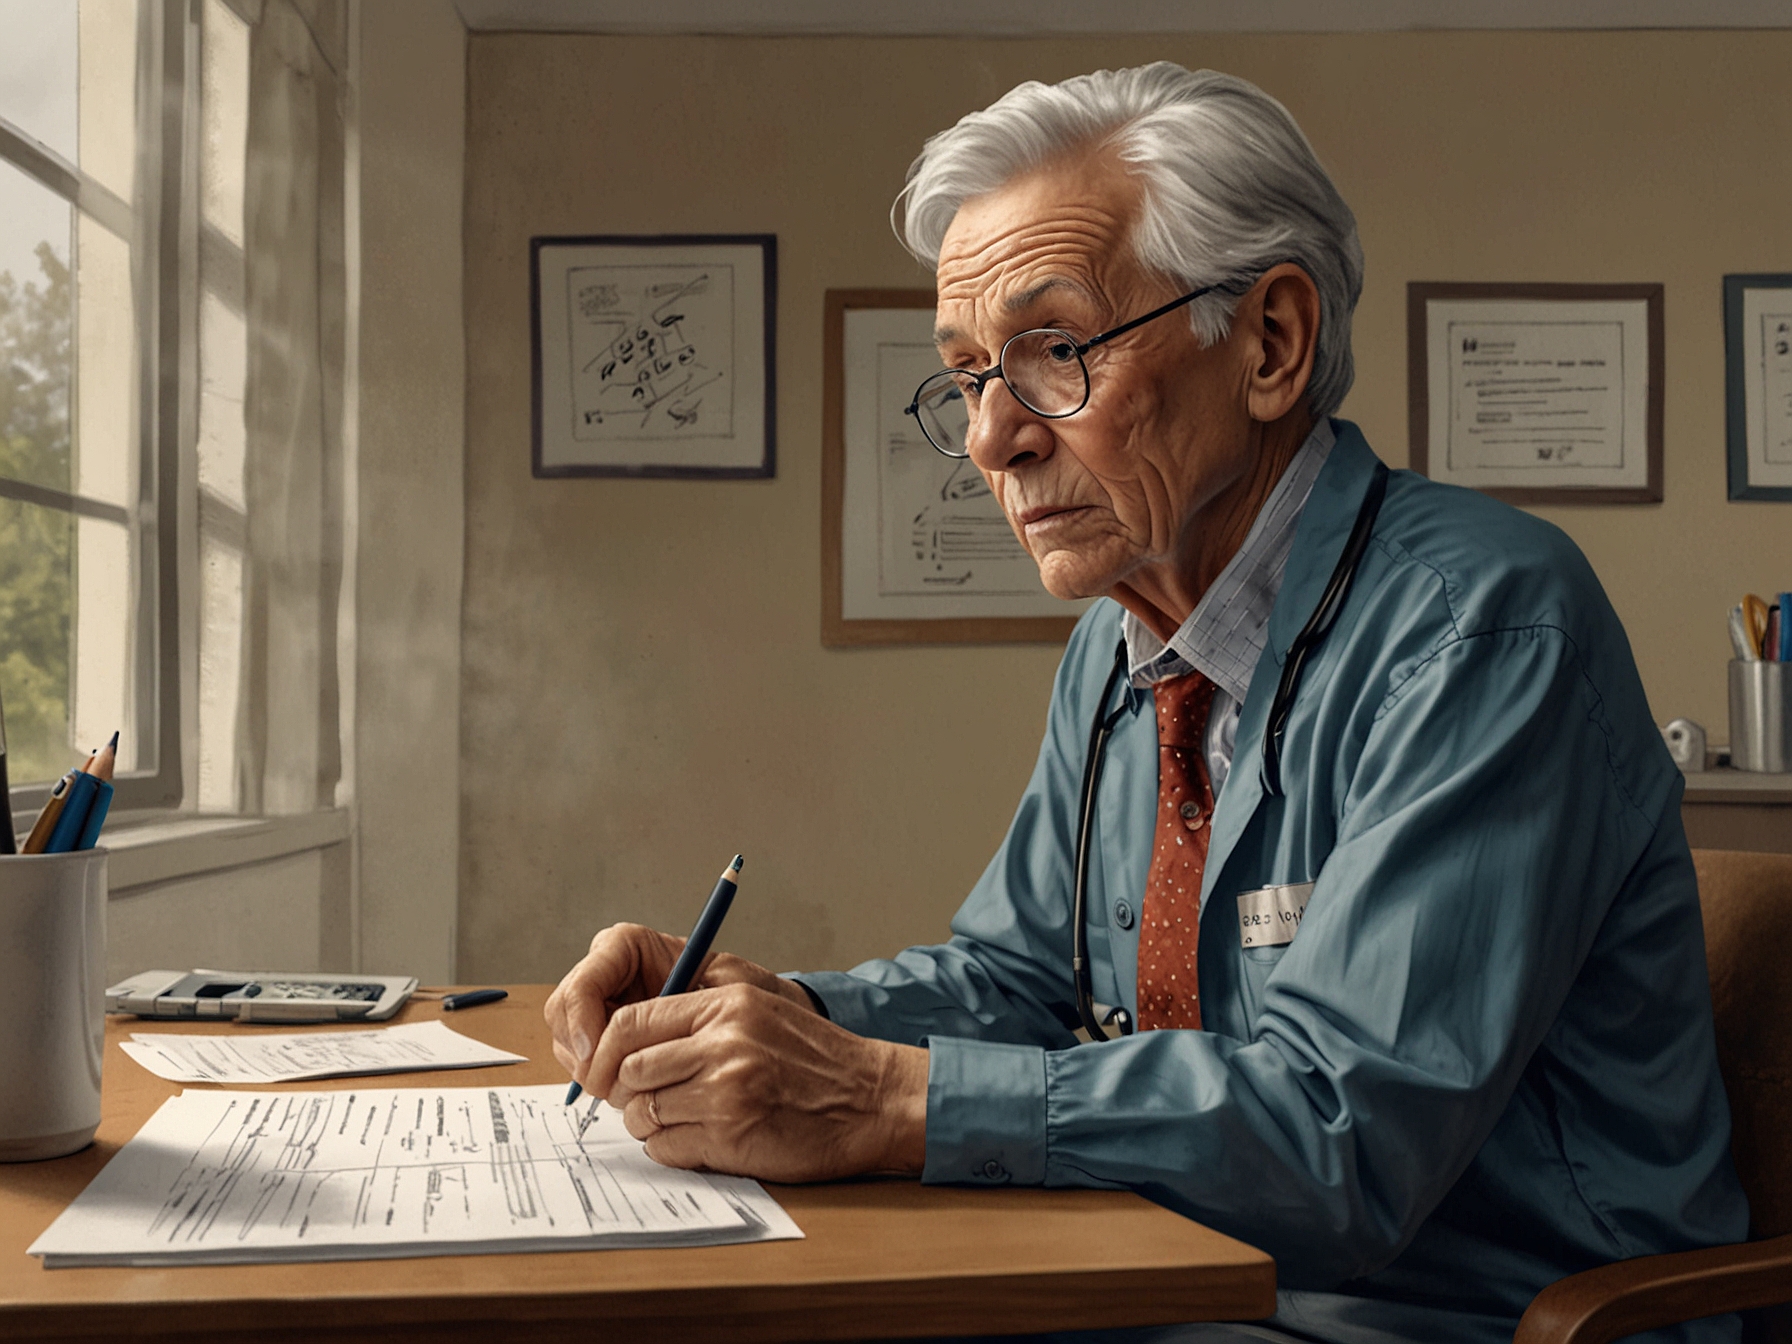 An elderly person sits in a medical office, looking concerned as a doctor reviews medical bills, highlighting the financial struggle families face when securing care for their loved ones.